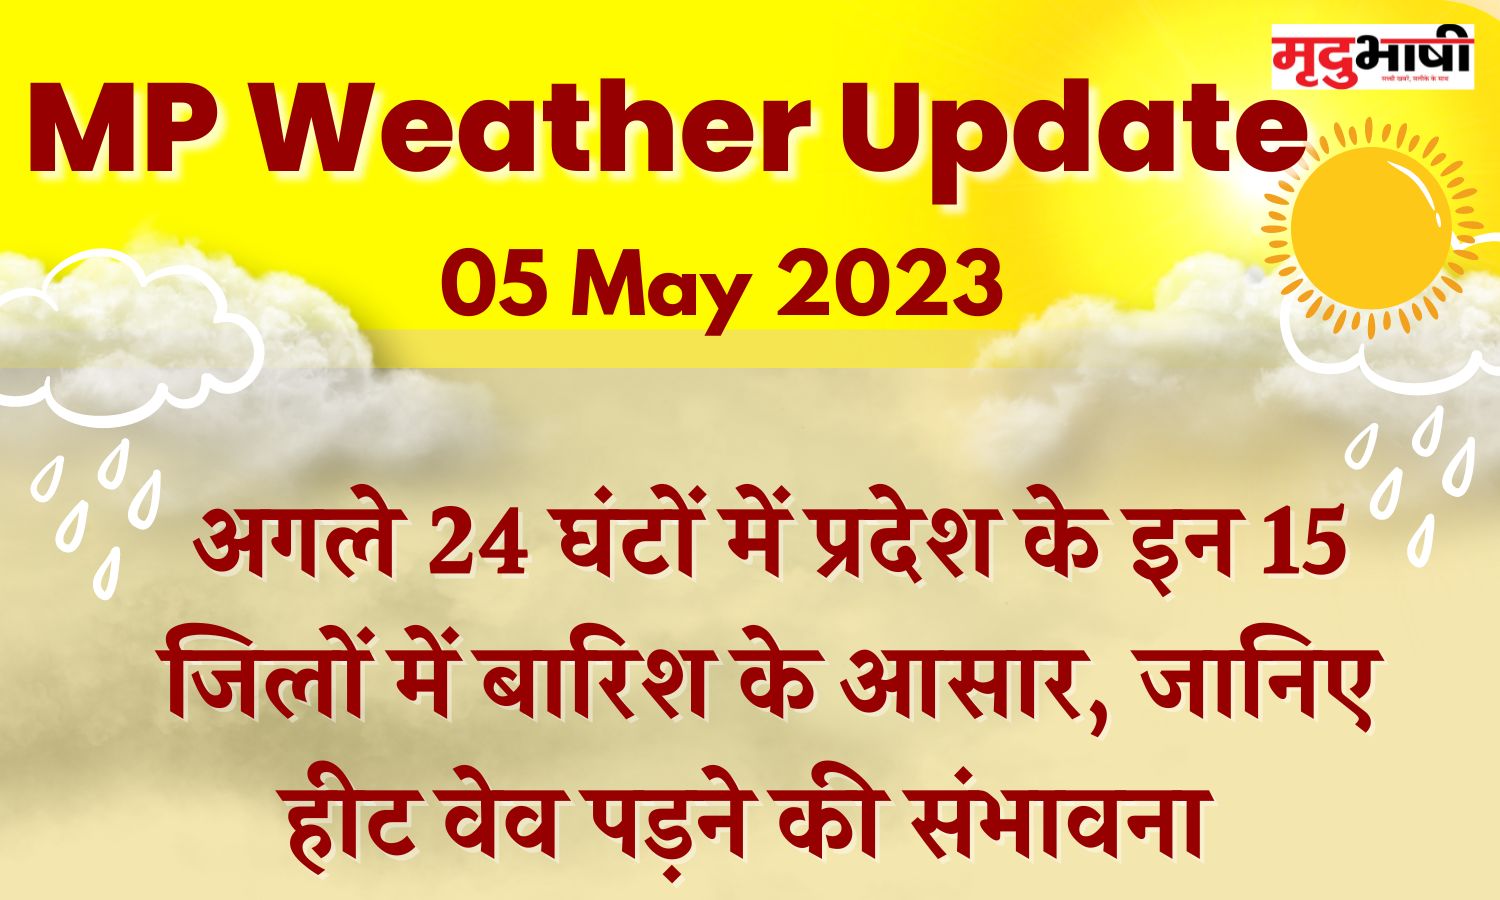 mp weather news,mp weather news,mp weather news today,mp weather report today,mp weather news in hindi today,mp weather report, mp weather today,mp weather forecast,rain in mp today, mp weather update, mp weather forecast, mp weather news today,mp weather 5 may 2023,